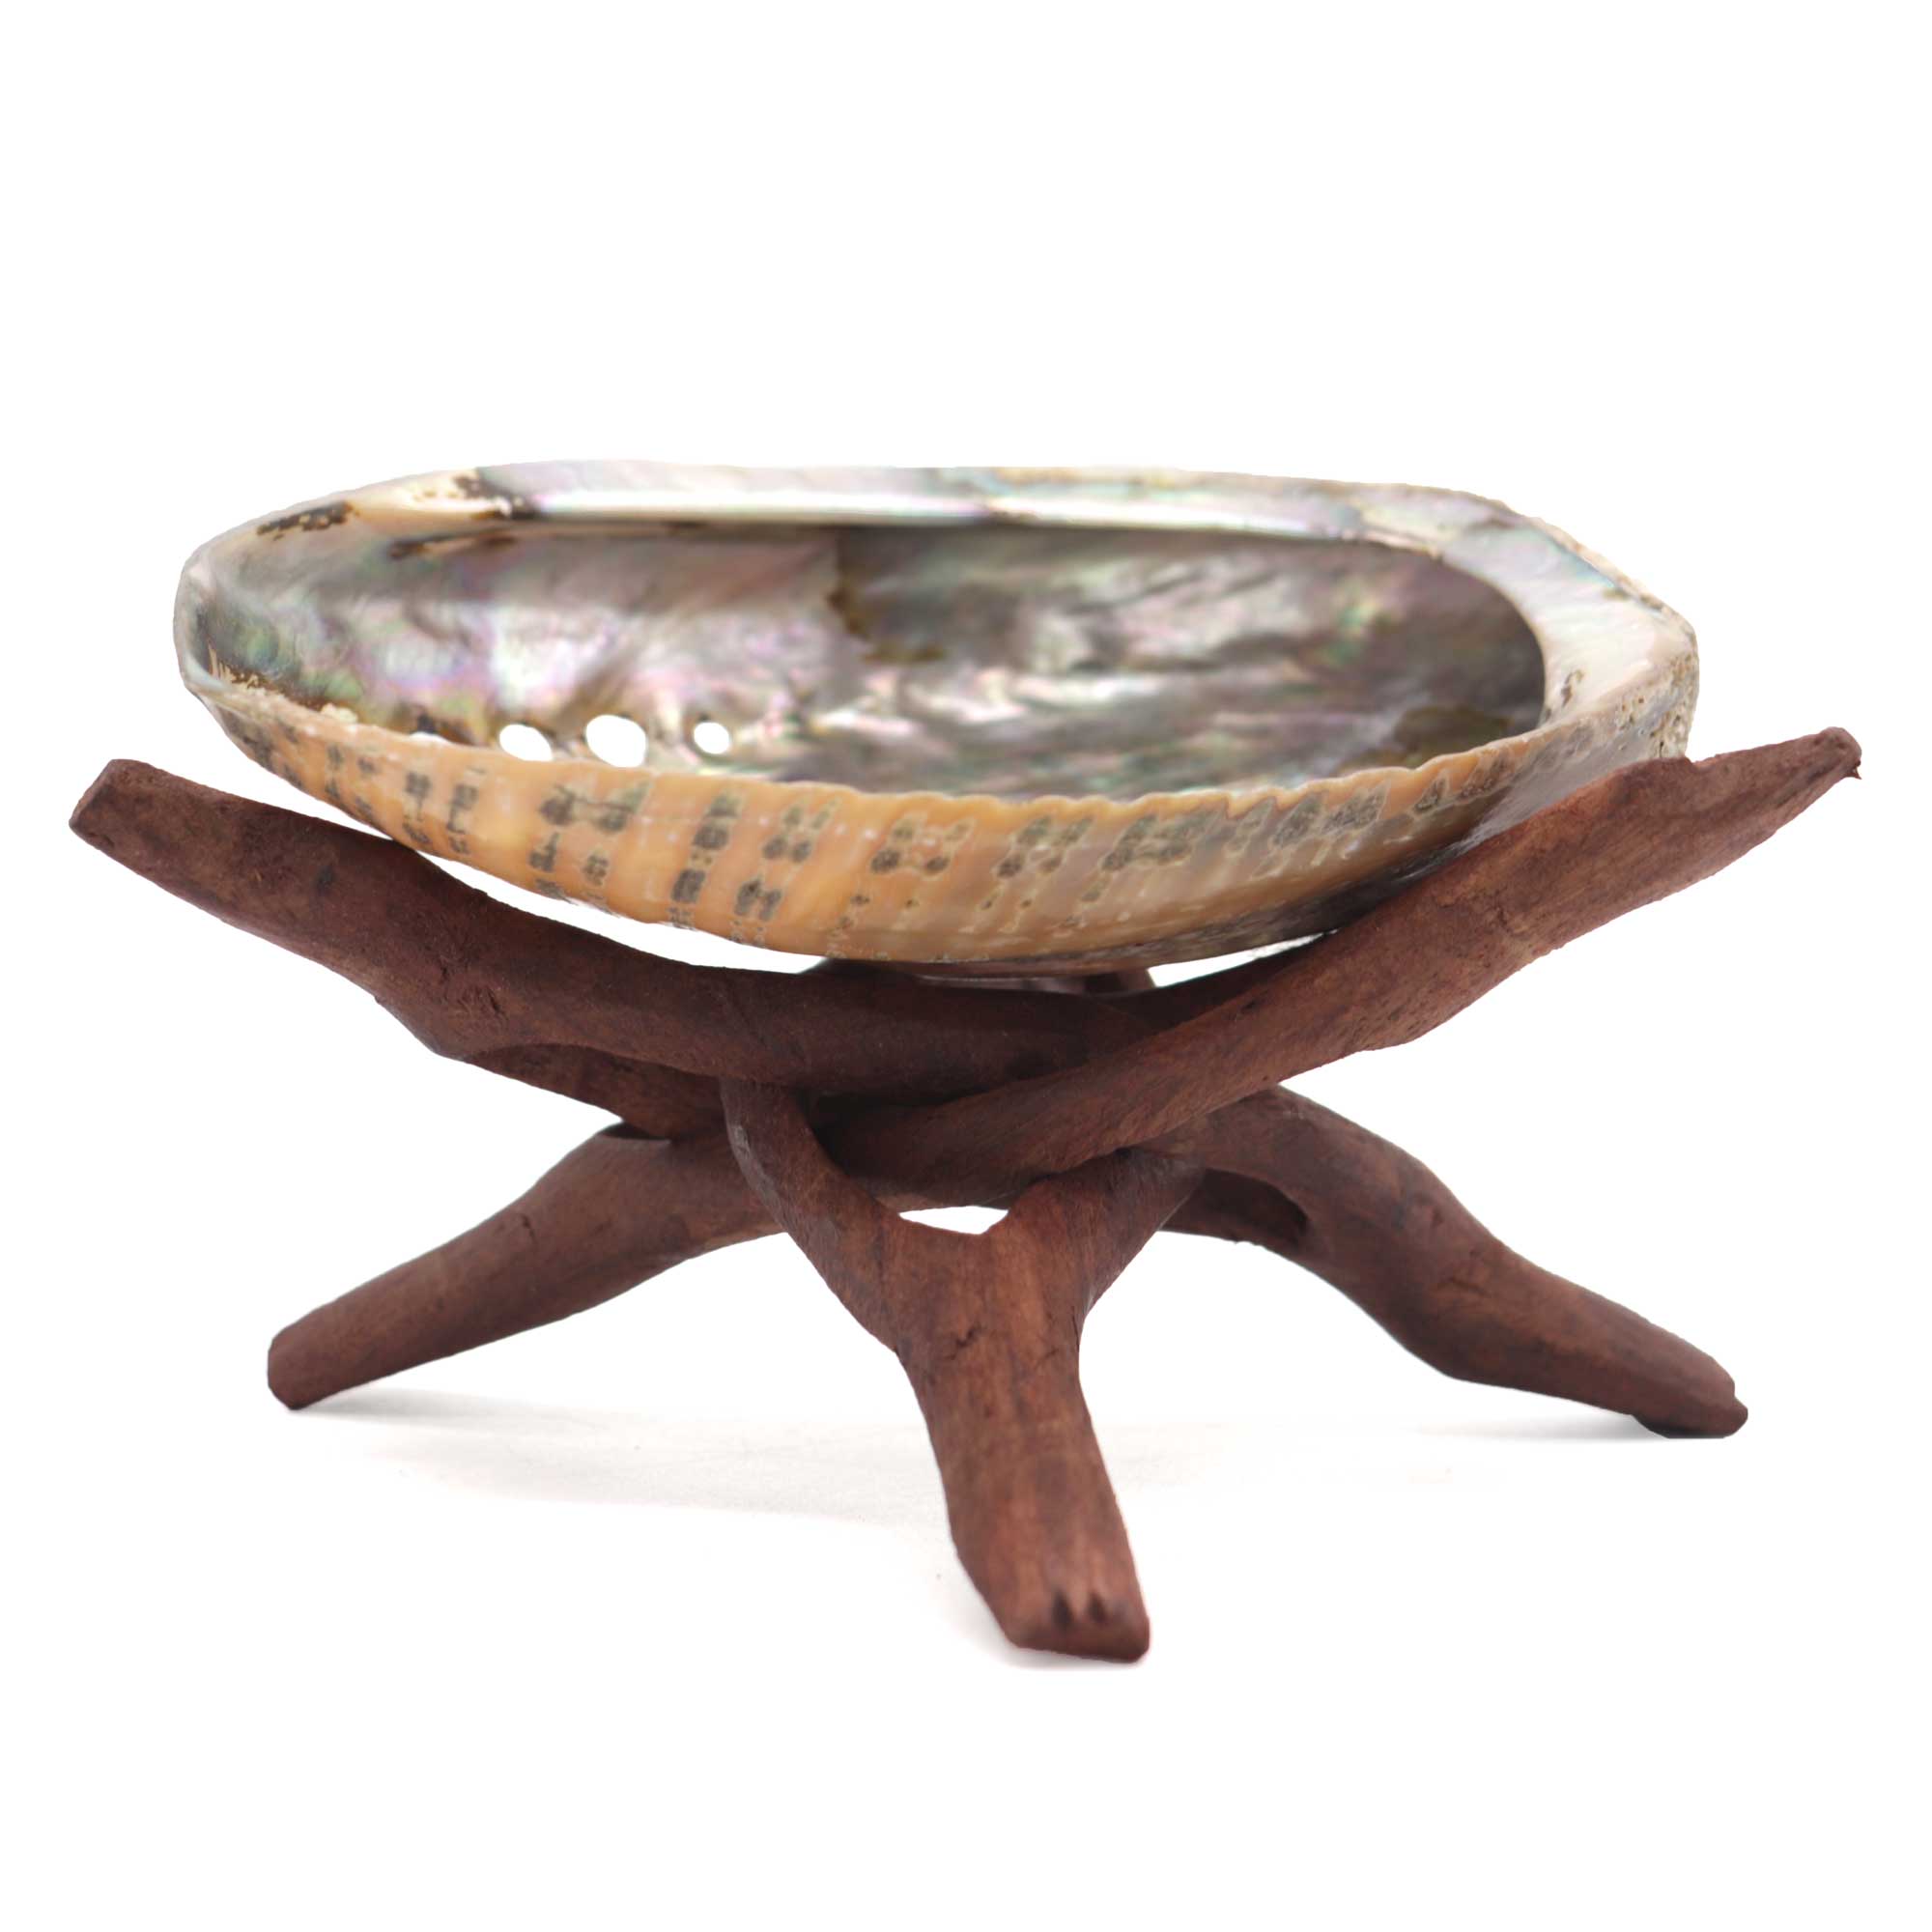 Abalone Shell and Stand Set - 13 Moons